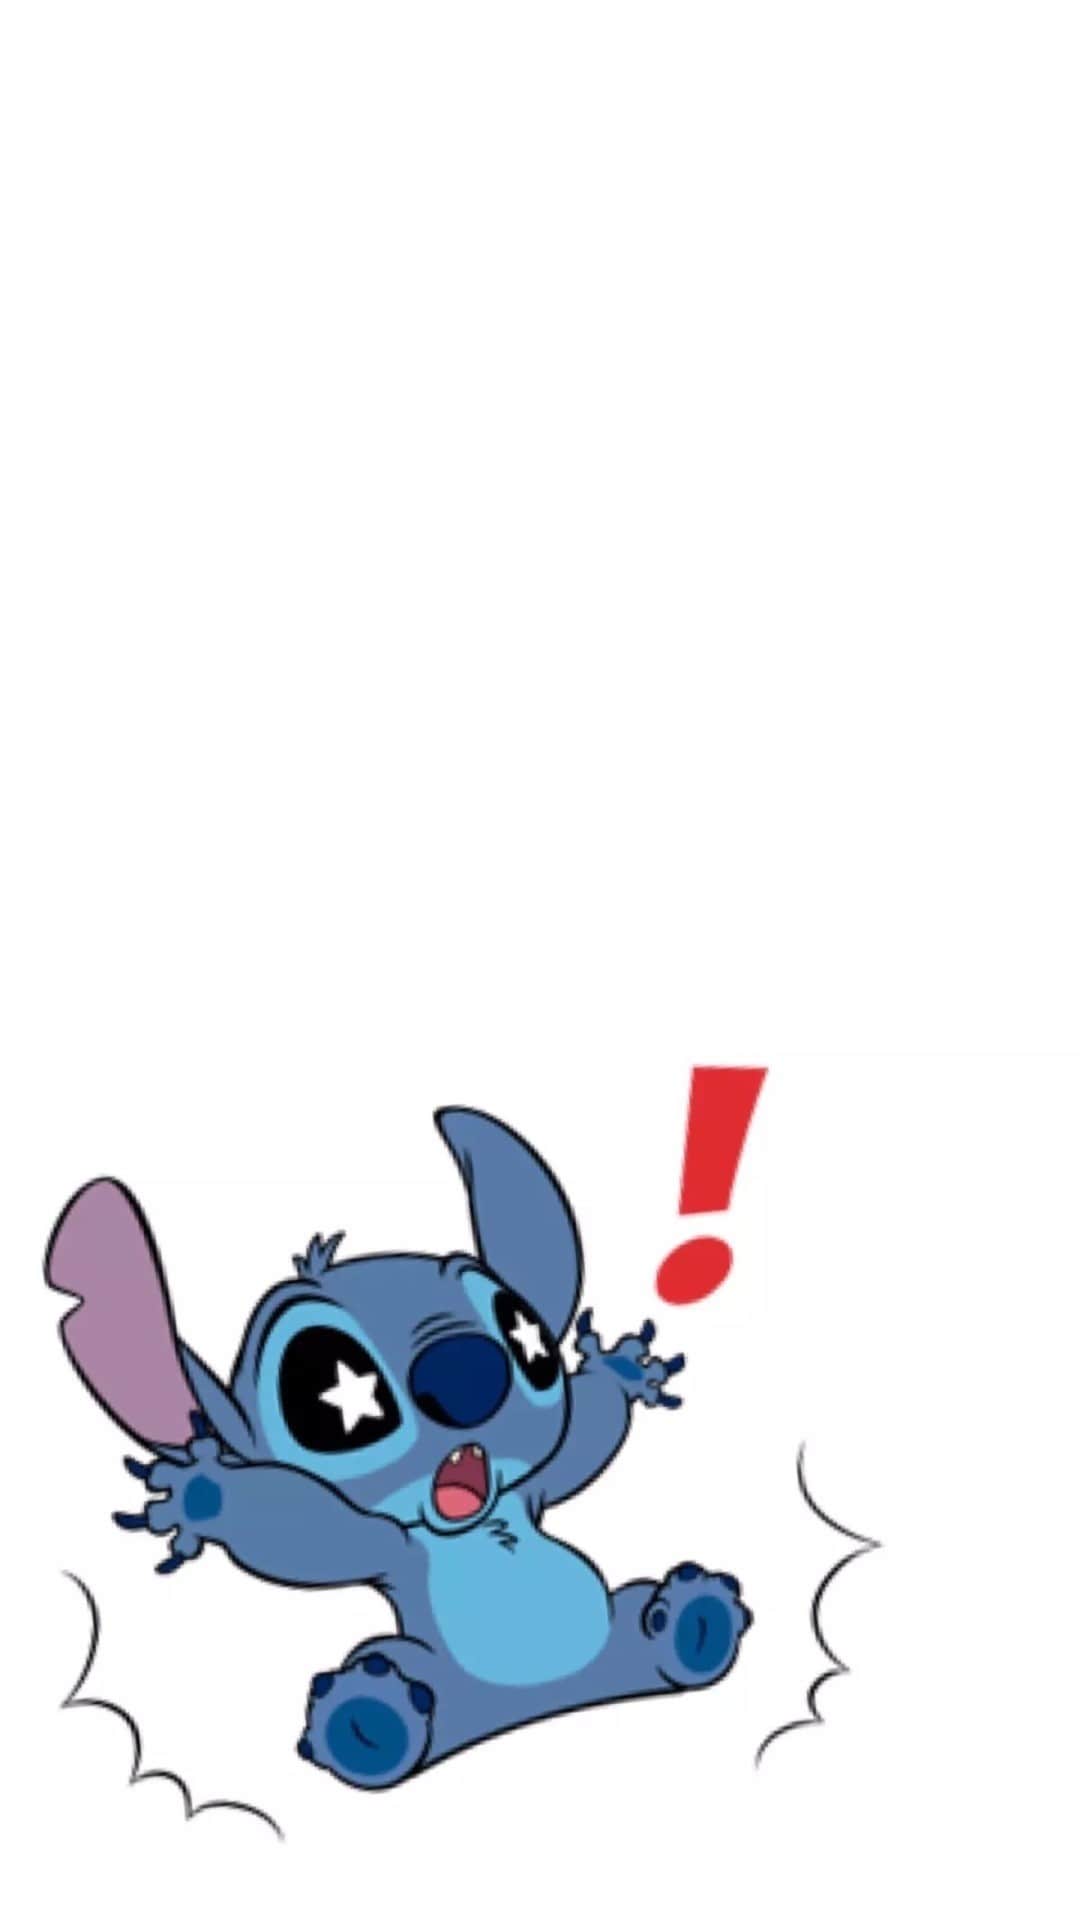 Featured image of post Home Screen Stitch Wallpapers Cute / Disney phone wallpaper homescreen wallpaper cute wallpaper backgrounds wallpaper iphone cute tumblr wallpaper aesthetic iphone wallpaper get lilo and stitch wallpaper in hd for your desktop if you have laptop or computer and download mobile resolution backgrounds and images of.